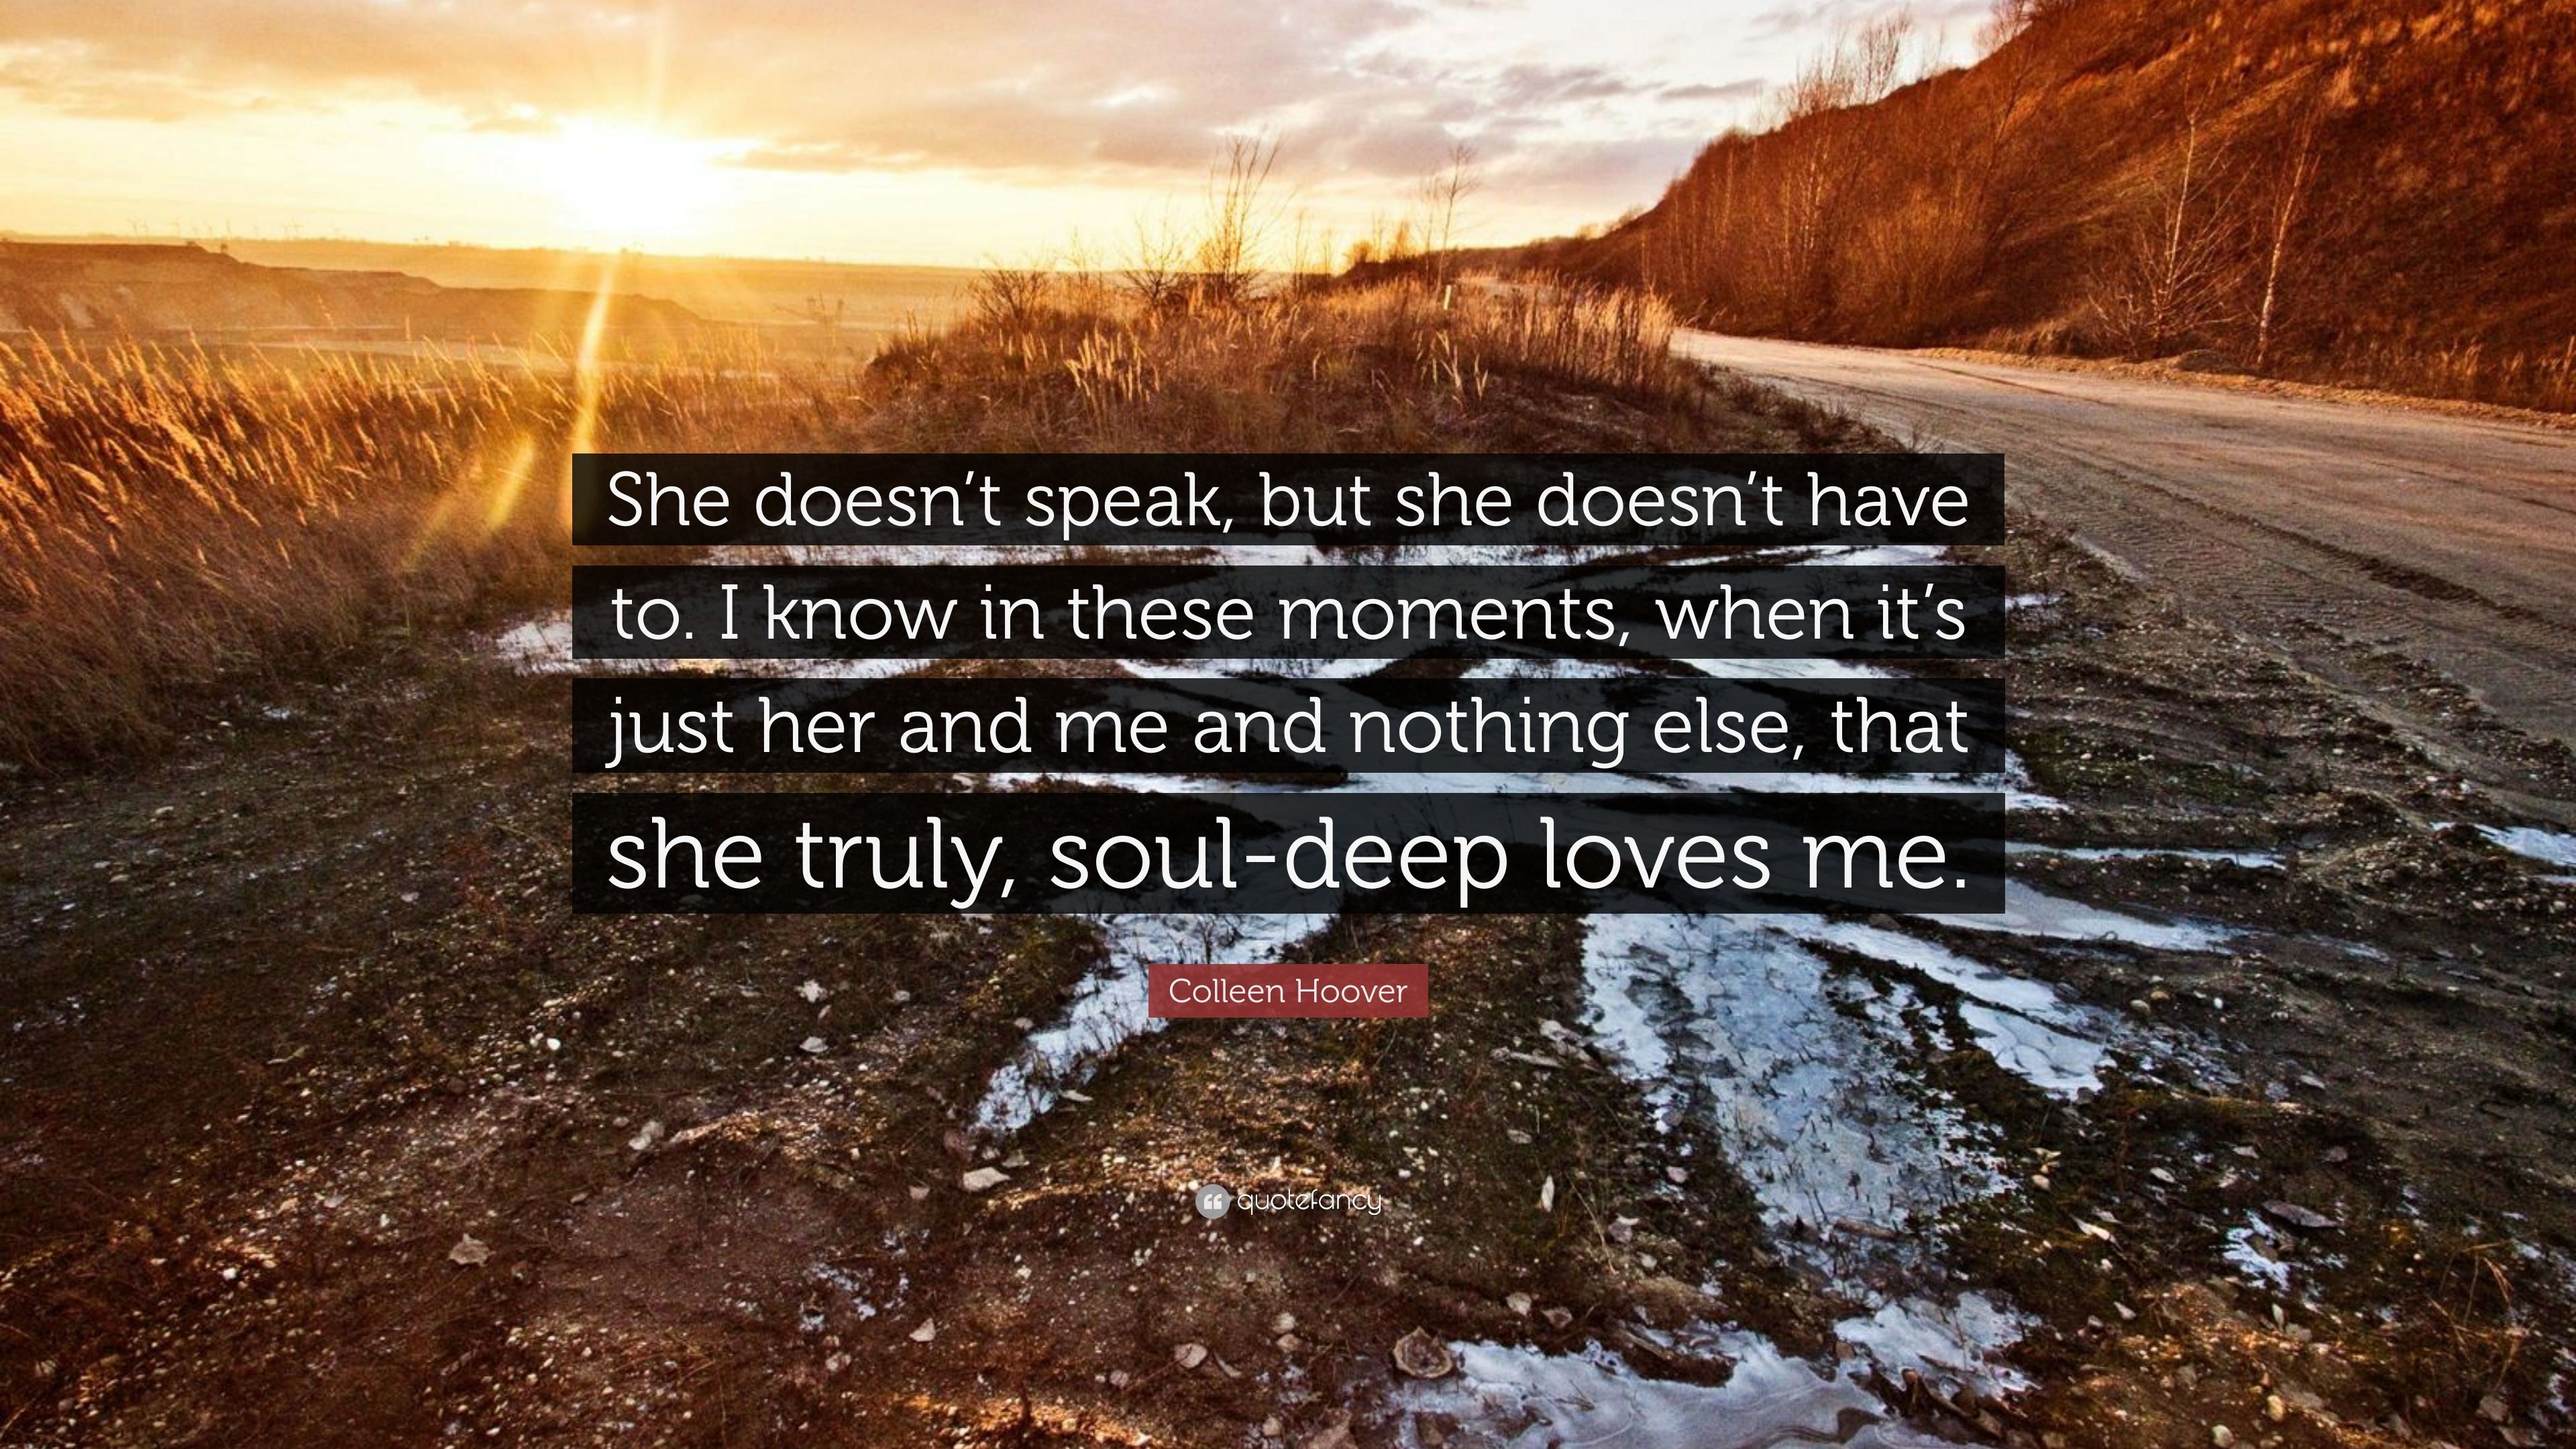 Colleen Hoover Quote She Doesn T Speak But She Doesn T Have To I Know In These Moments When It S Just Her And Me And Nothing Else That Sh 12 Wallpapers Quotefancy